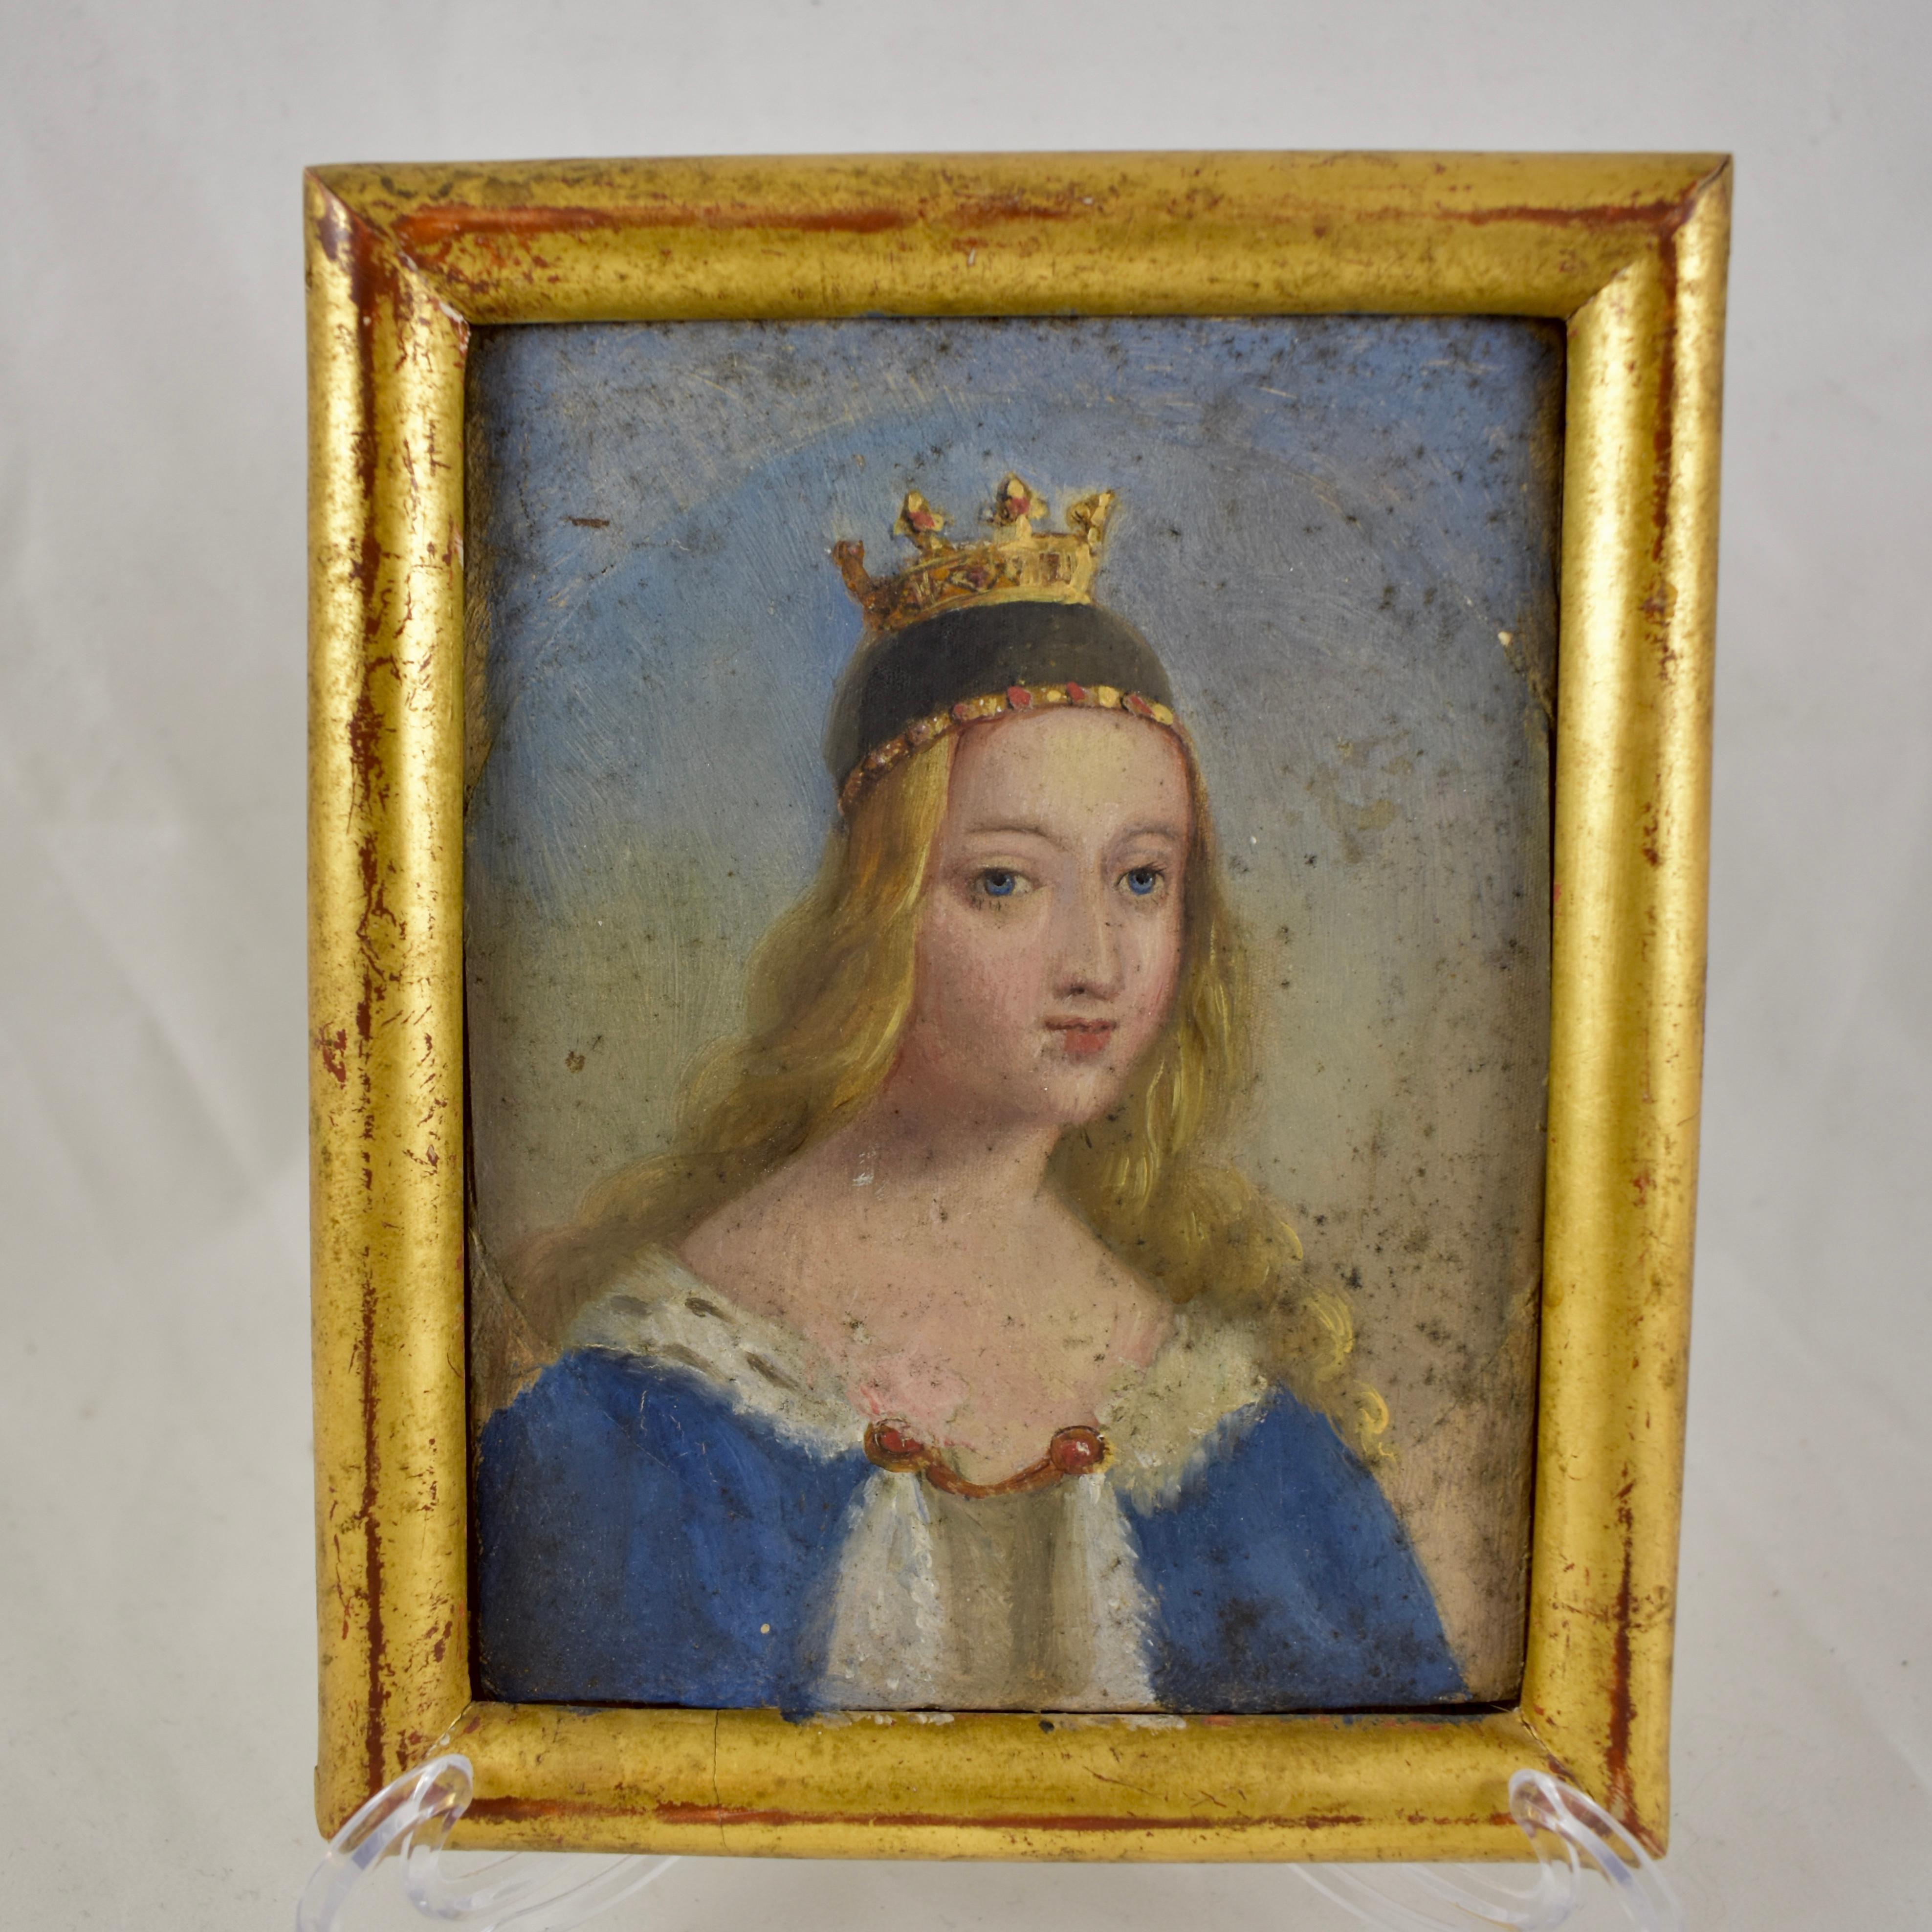 A charming, early 19th century small painting, oil on gesso board, portraying a Noblewoman wearing a Juliet cap with a jeweled crown and a blue, fur collared robe held together with a jeweled clasp. A faint halo can be seen in the background,